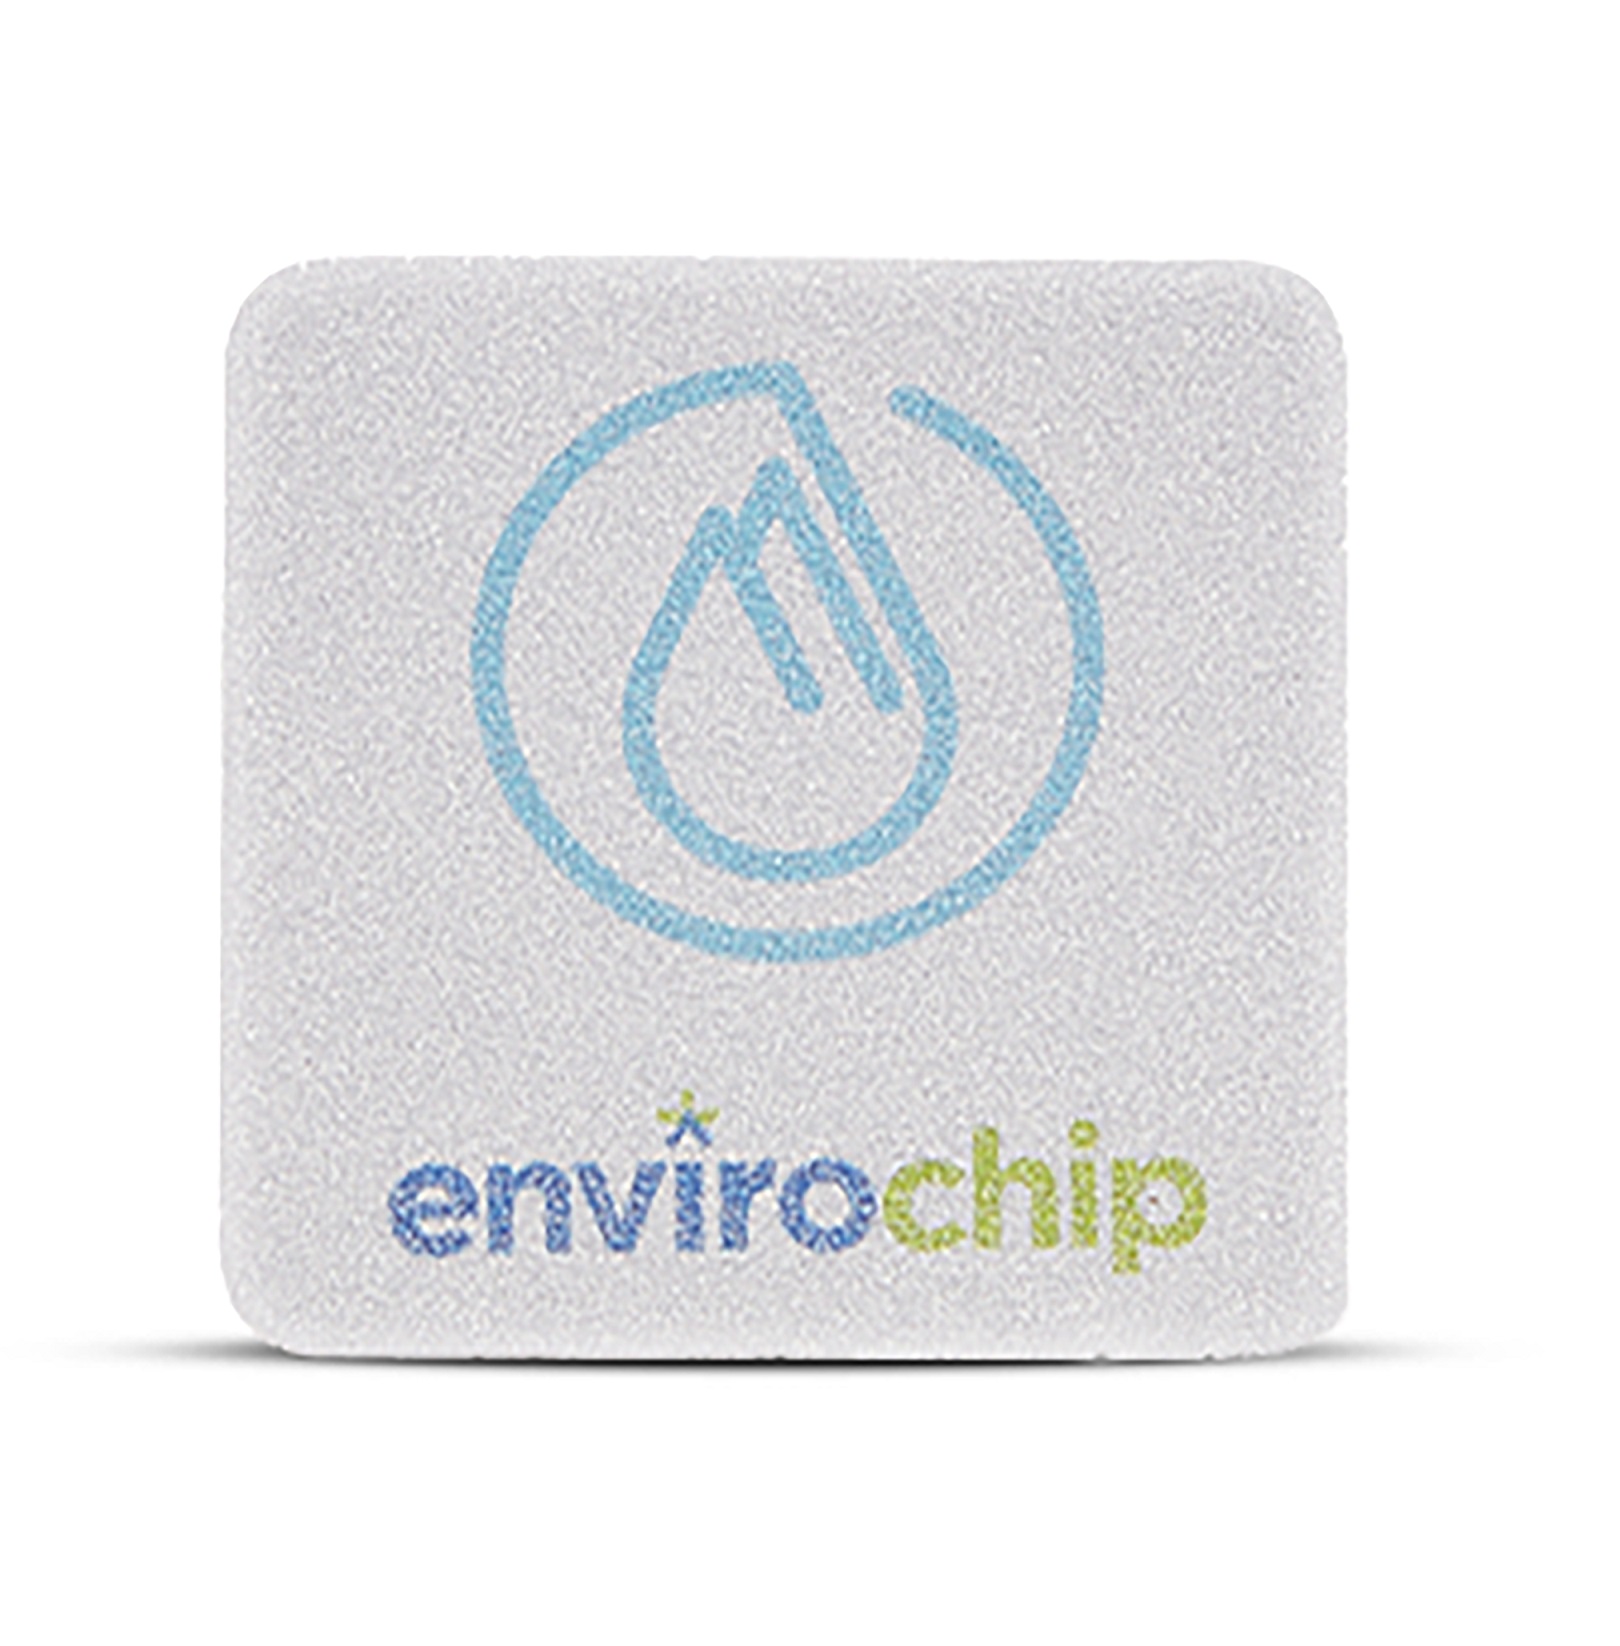 envirochip-clinically-tested-patented-anti-radiation-chip-for-tablet-wi-fi-router-pc-monitor-elements-design-water-silver